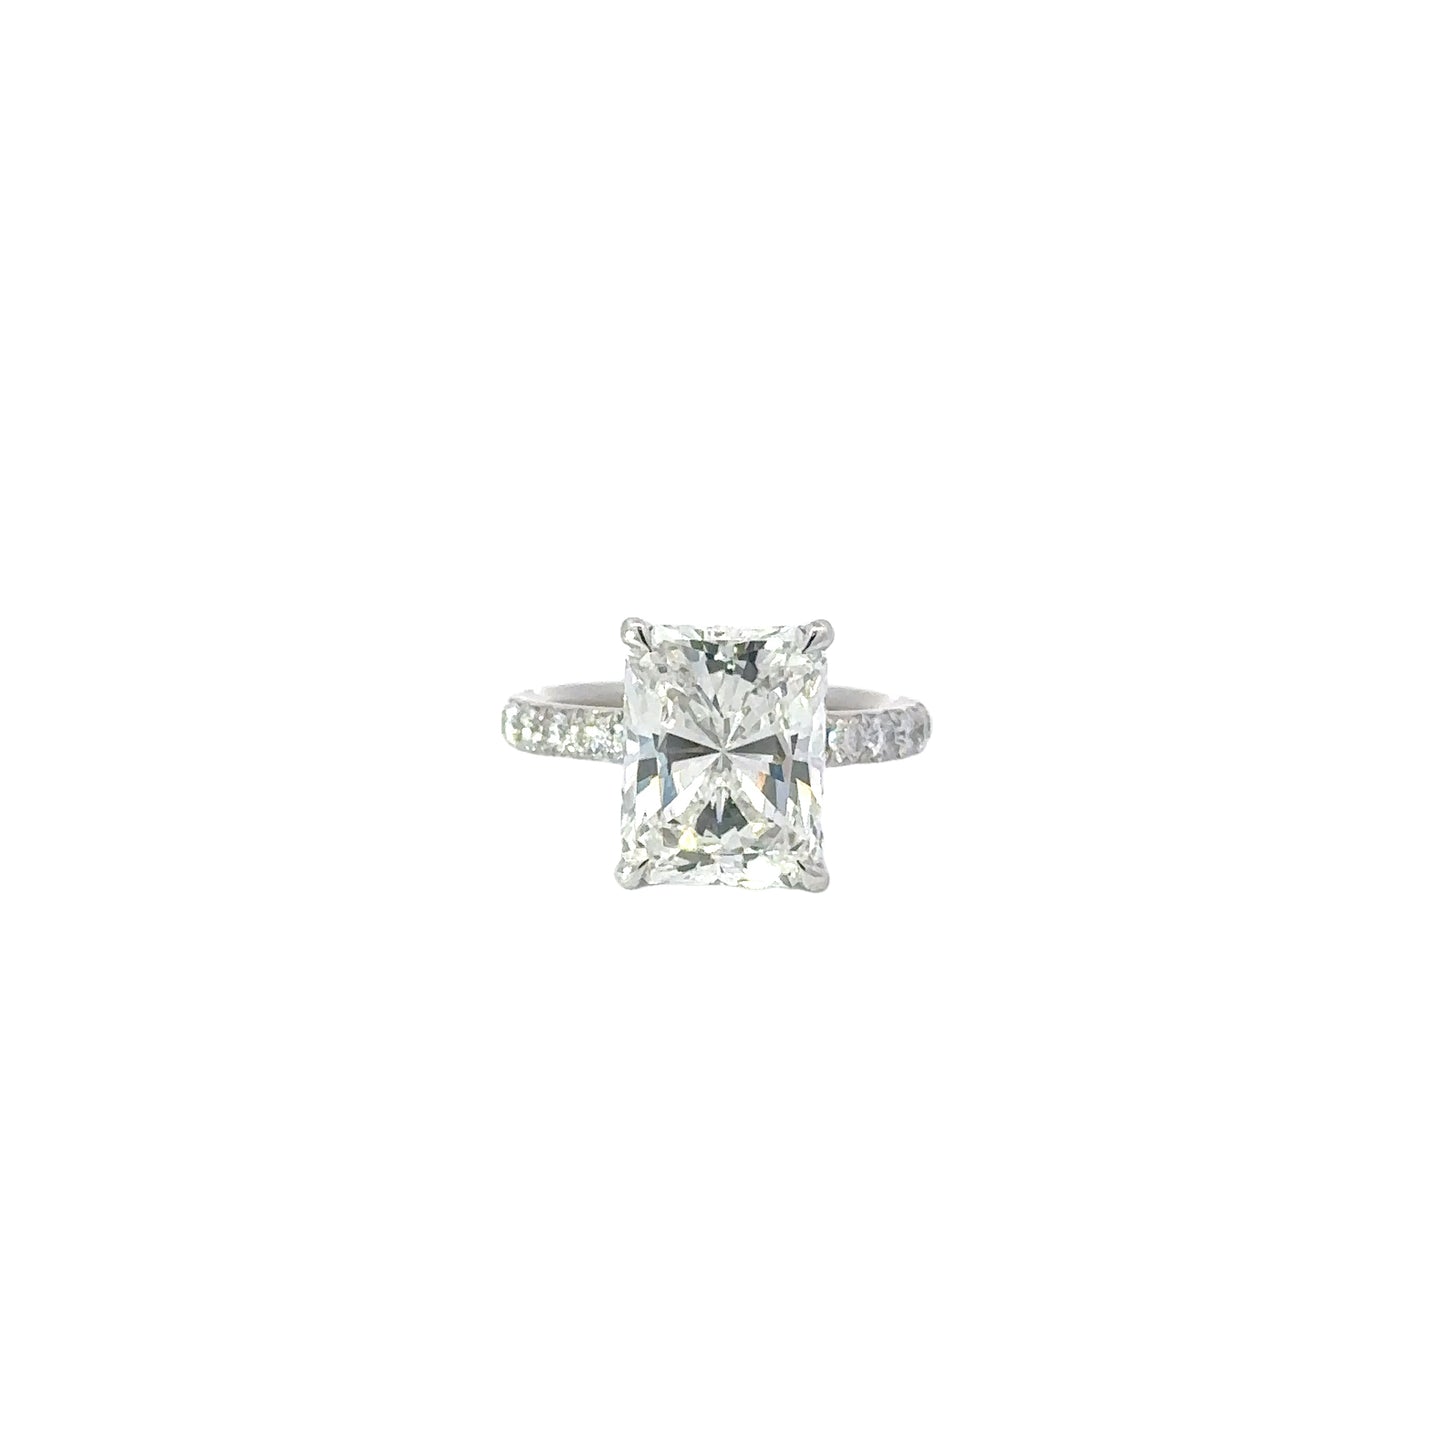 4.01 Carat Natural Radiant Engagement Ring with Hidden Halo - Happy Jewelers Fine Jewelry Lifetime Warranty